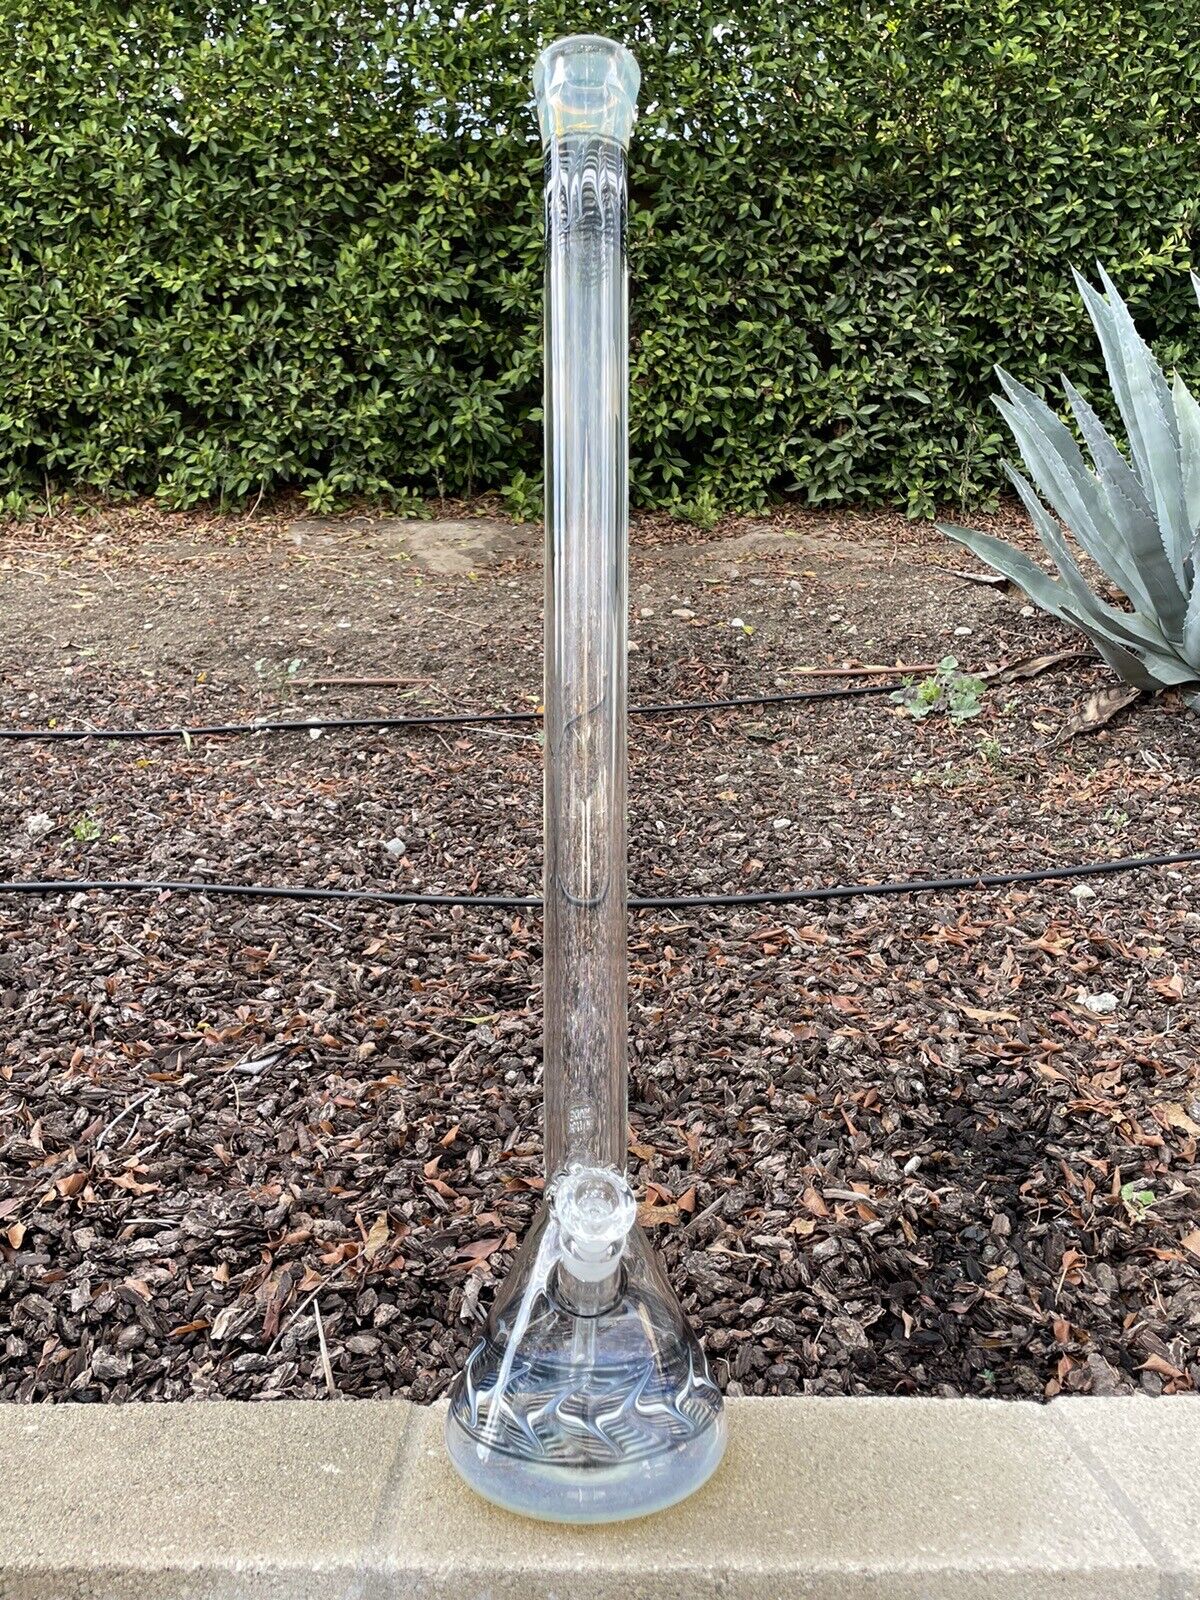 9mmHeavy Thick Glass Water Pipe Bong Beaker “33”Inch.Black and White Color🇺🇸